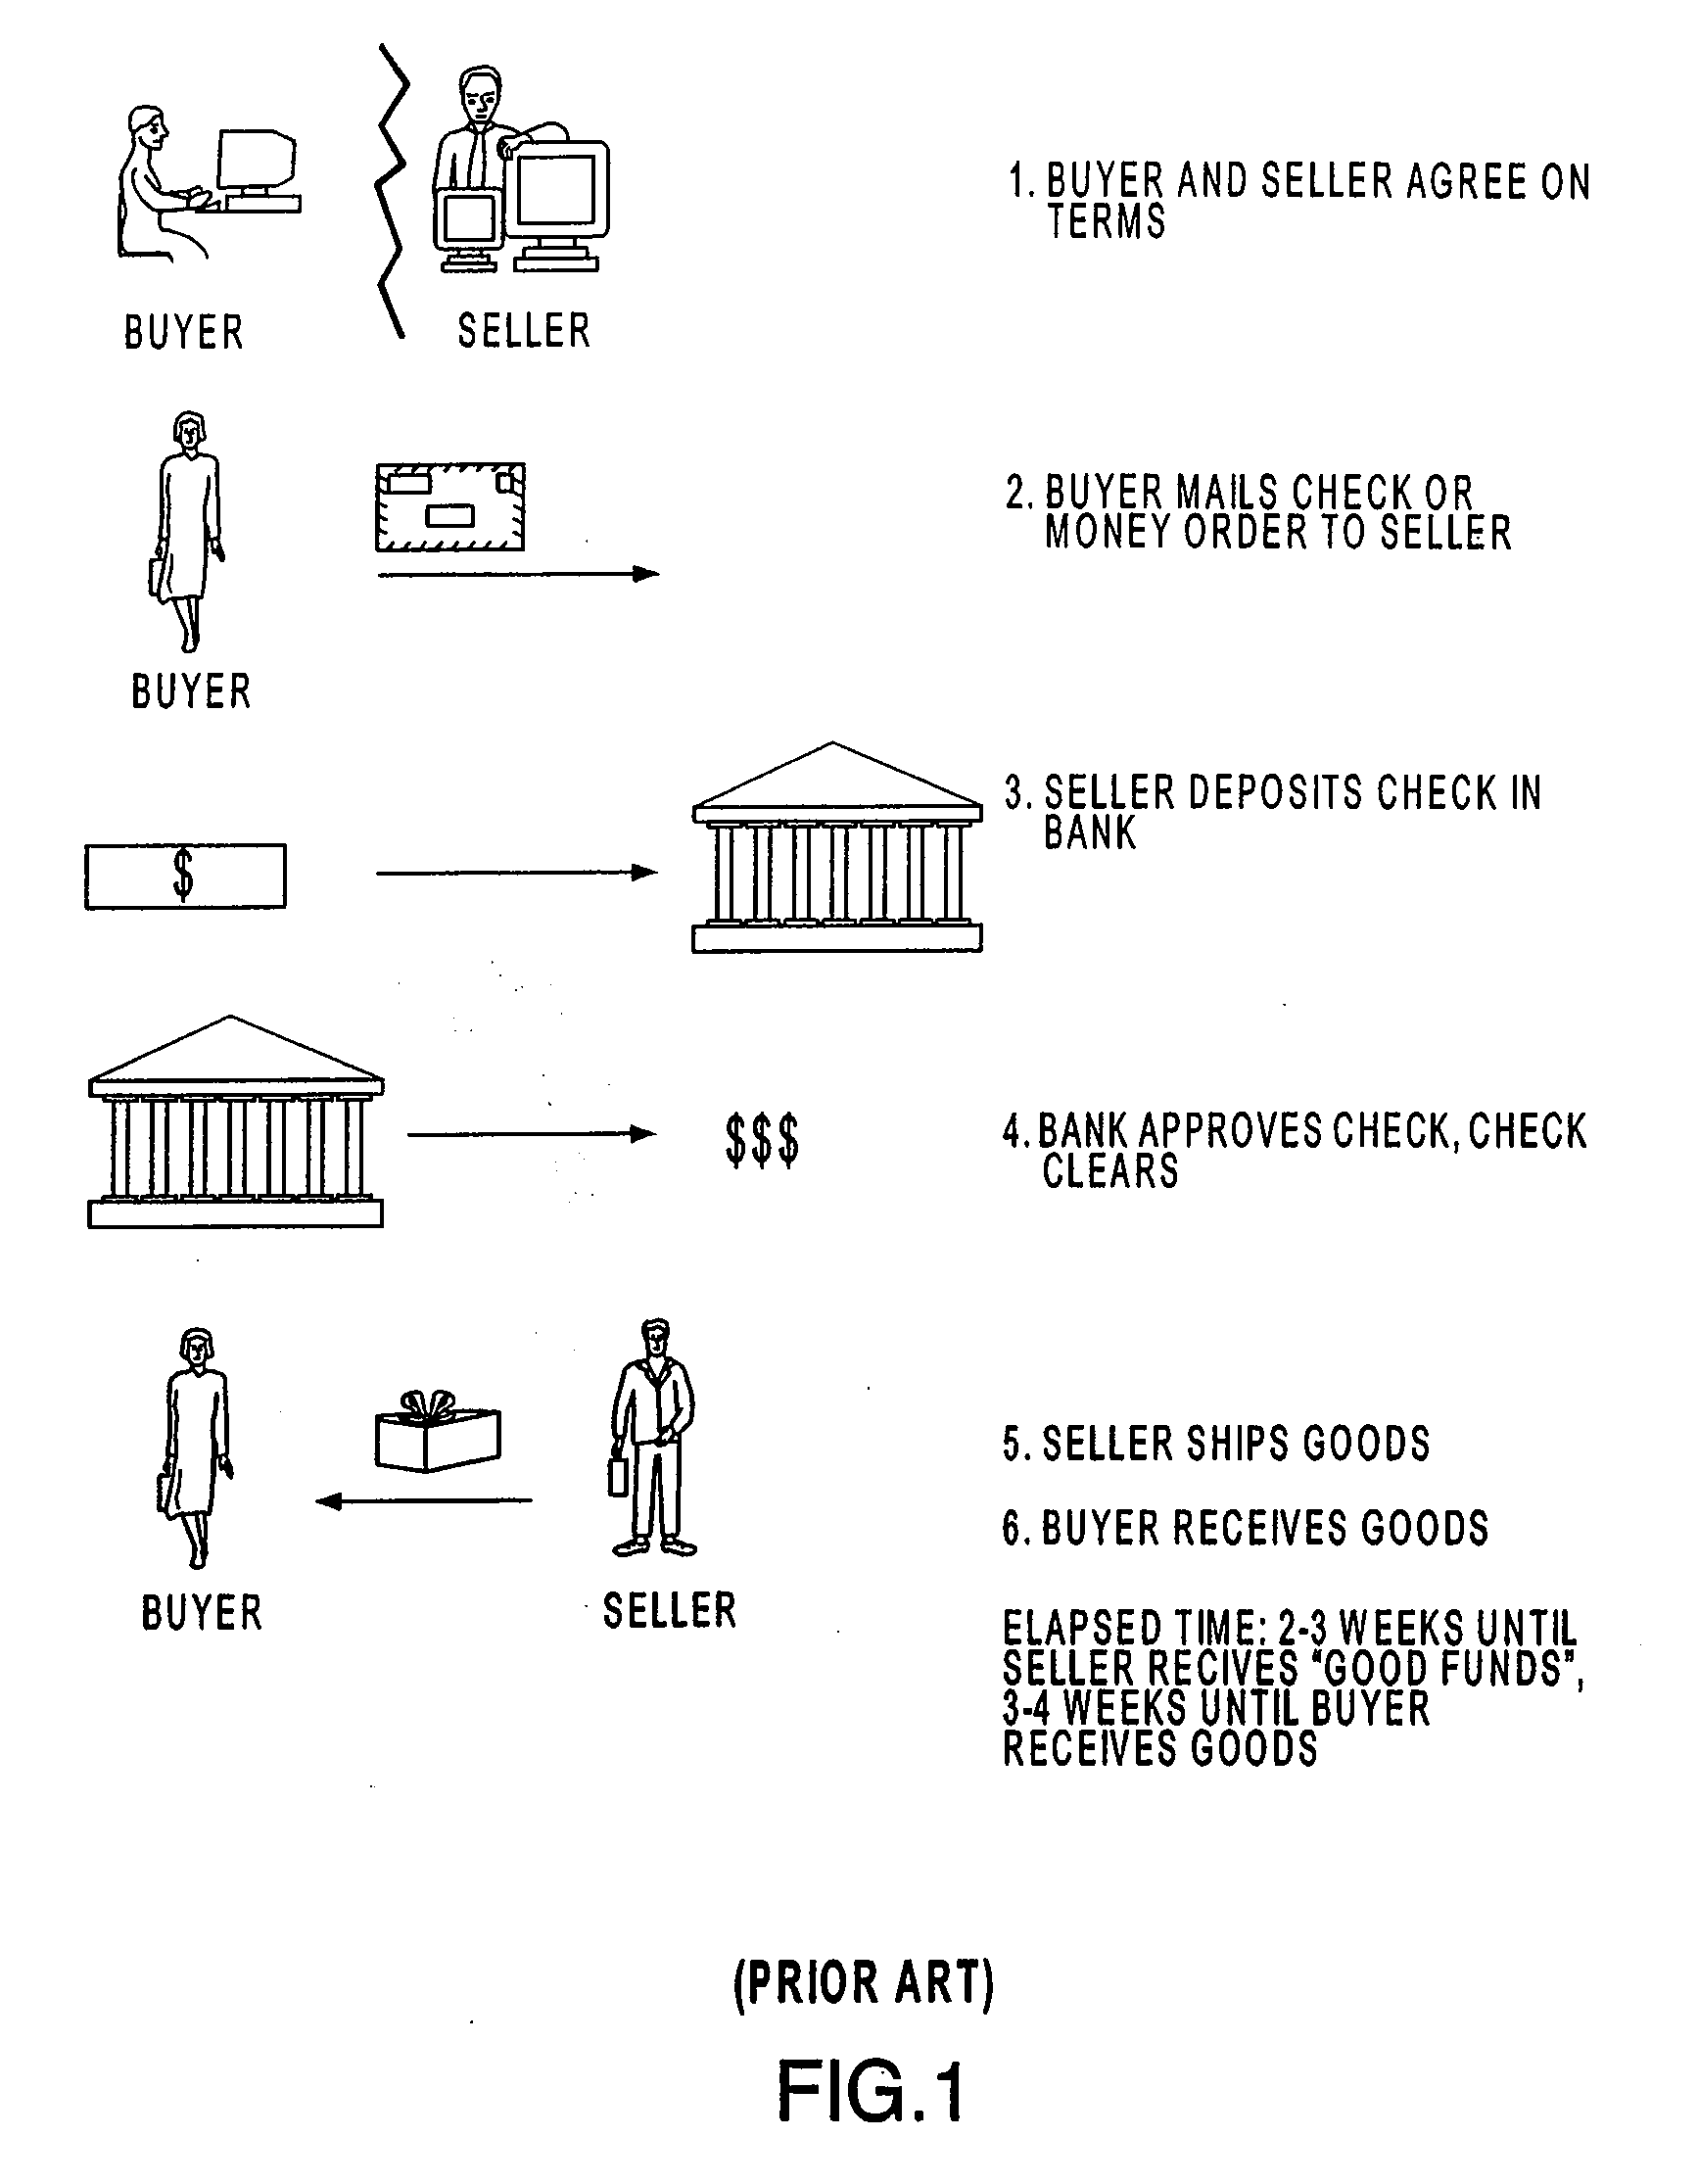 Systems and Methods for Facilitating Transactions Involving an Intermediary